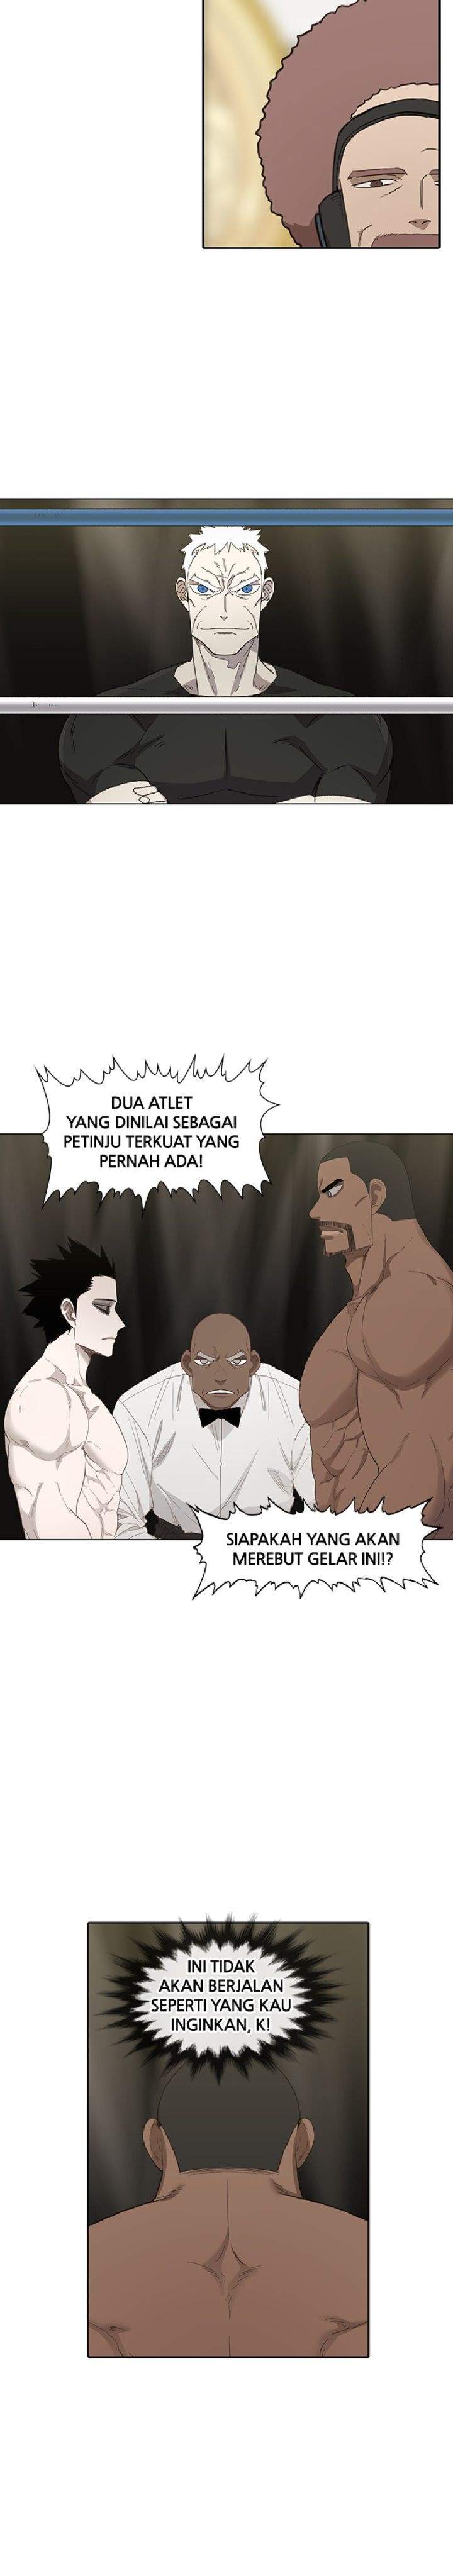 The Boxer Chapter 80